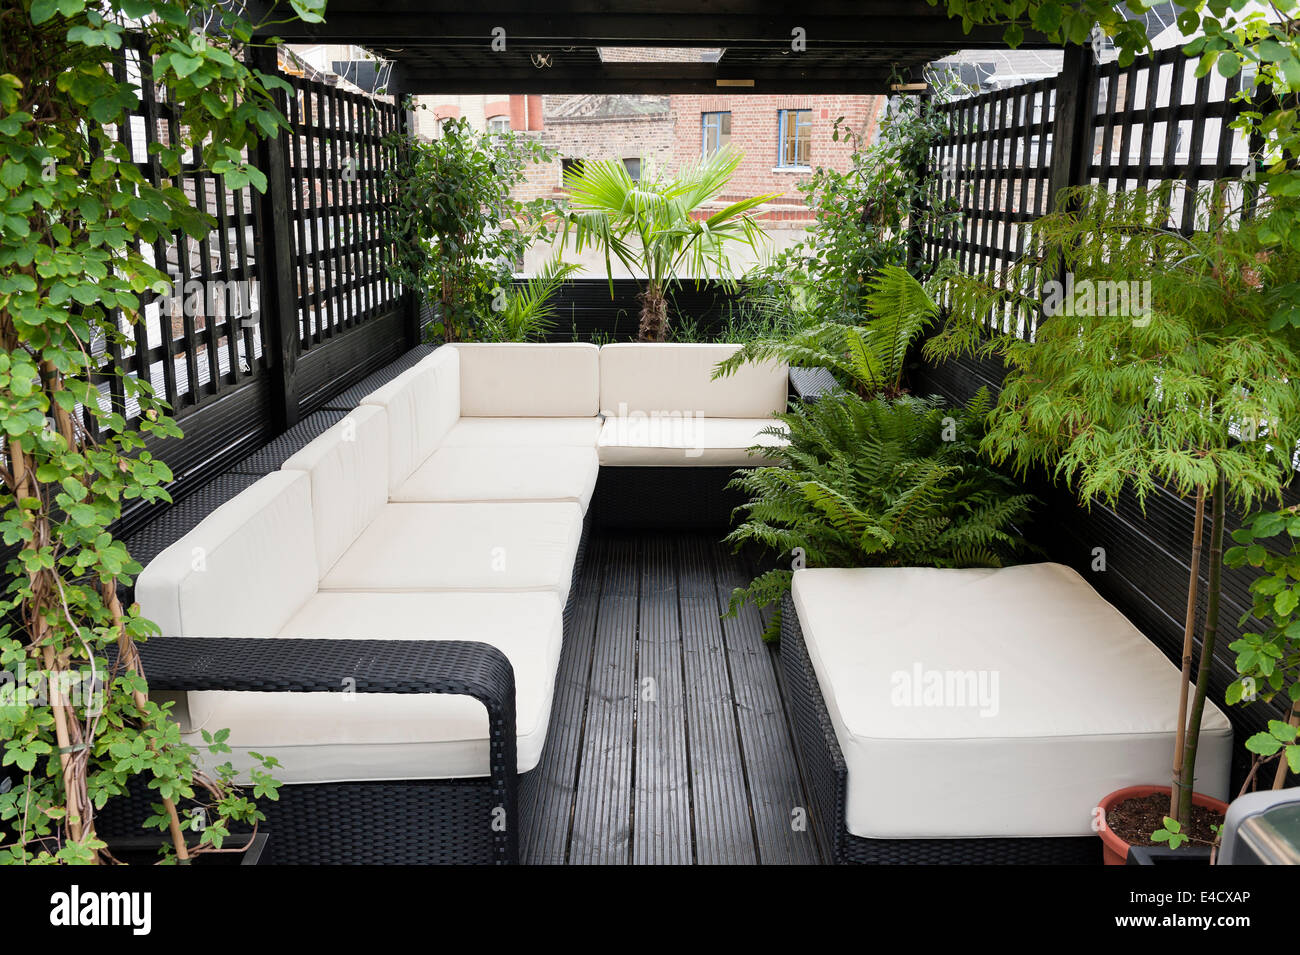 Rattan furniture on roof terrace with trellis Stock Photo